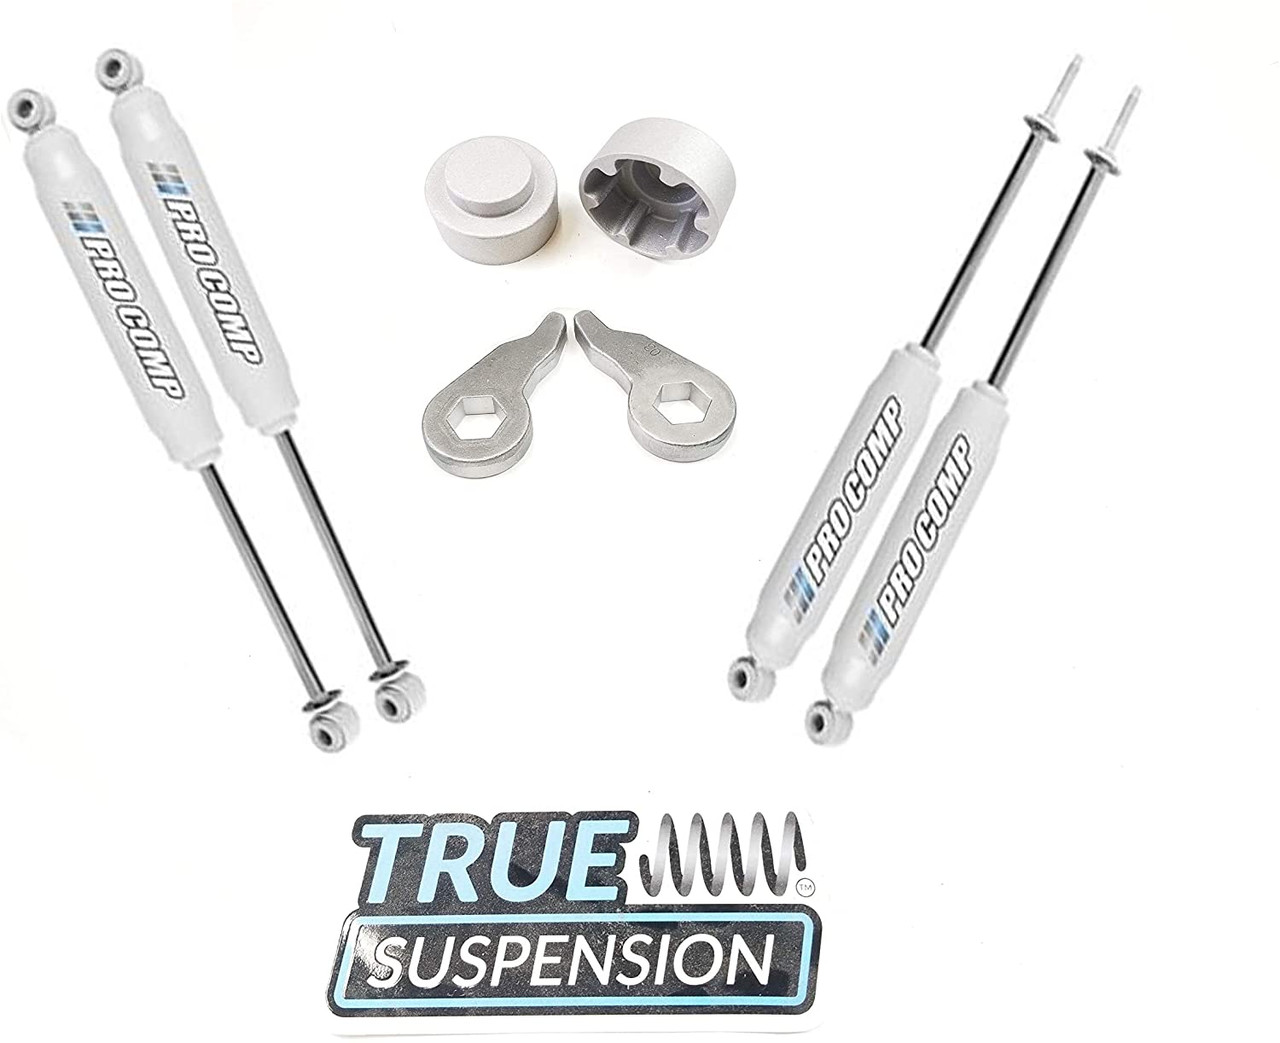 Compatible with Cadillac Escalade SUV 02-06 Complete Lift kit Front Adjustable 1-3" Torsion Keys + 2" Lift Steel Spacers + Set of ProComp Es9000 Nitrogen Charged Shocks Kit 4wd 2wd